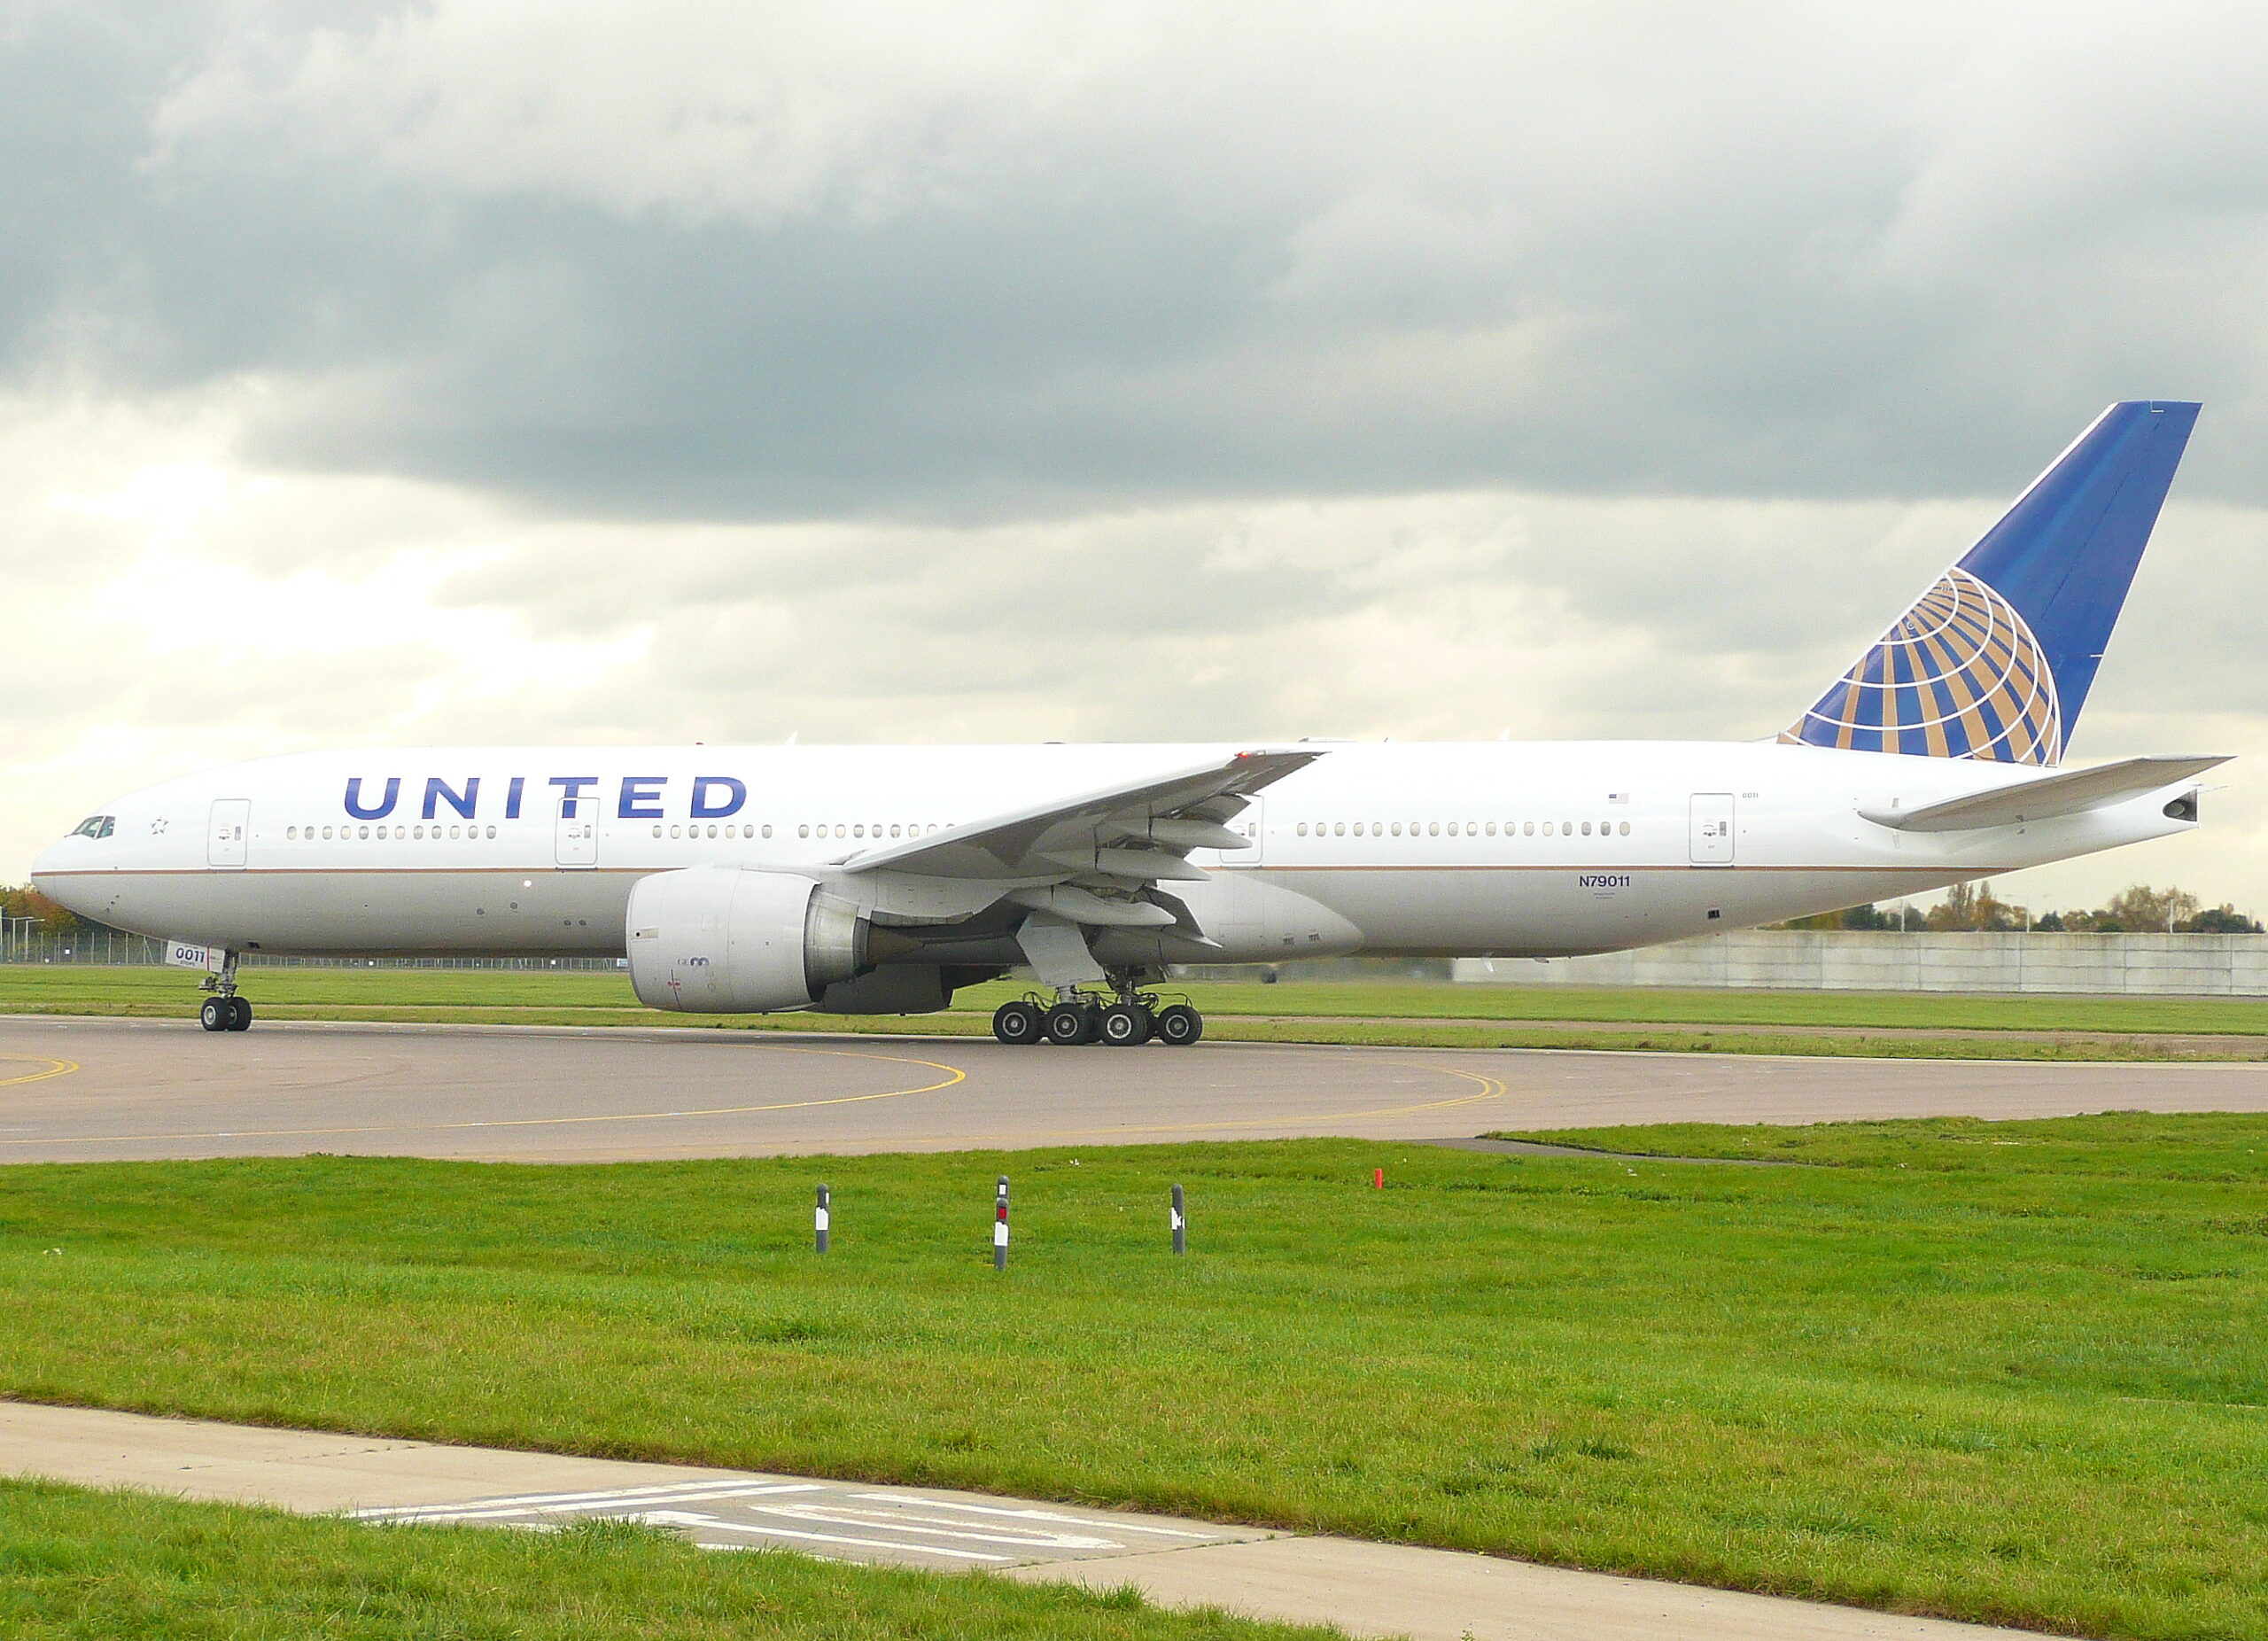 United Airlines continues to have trouble with its Boeing 777 fleet.